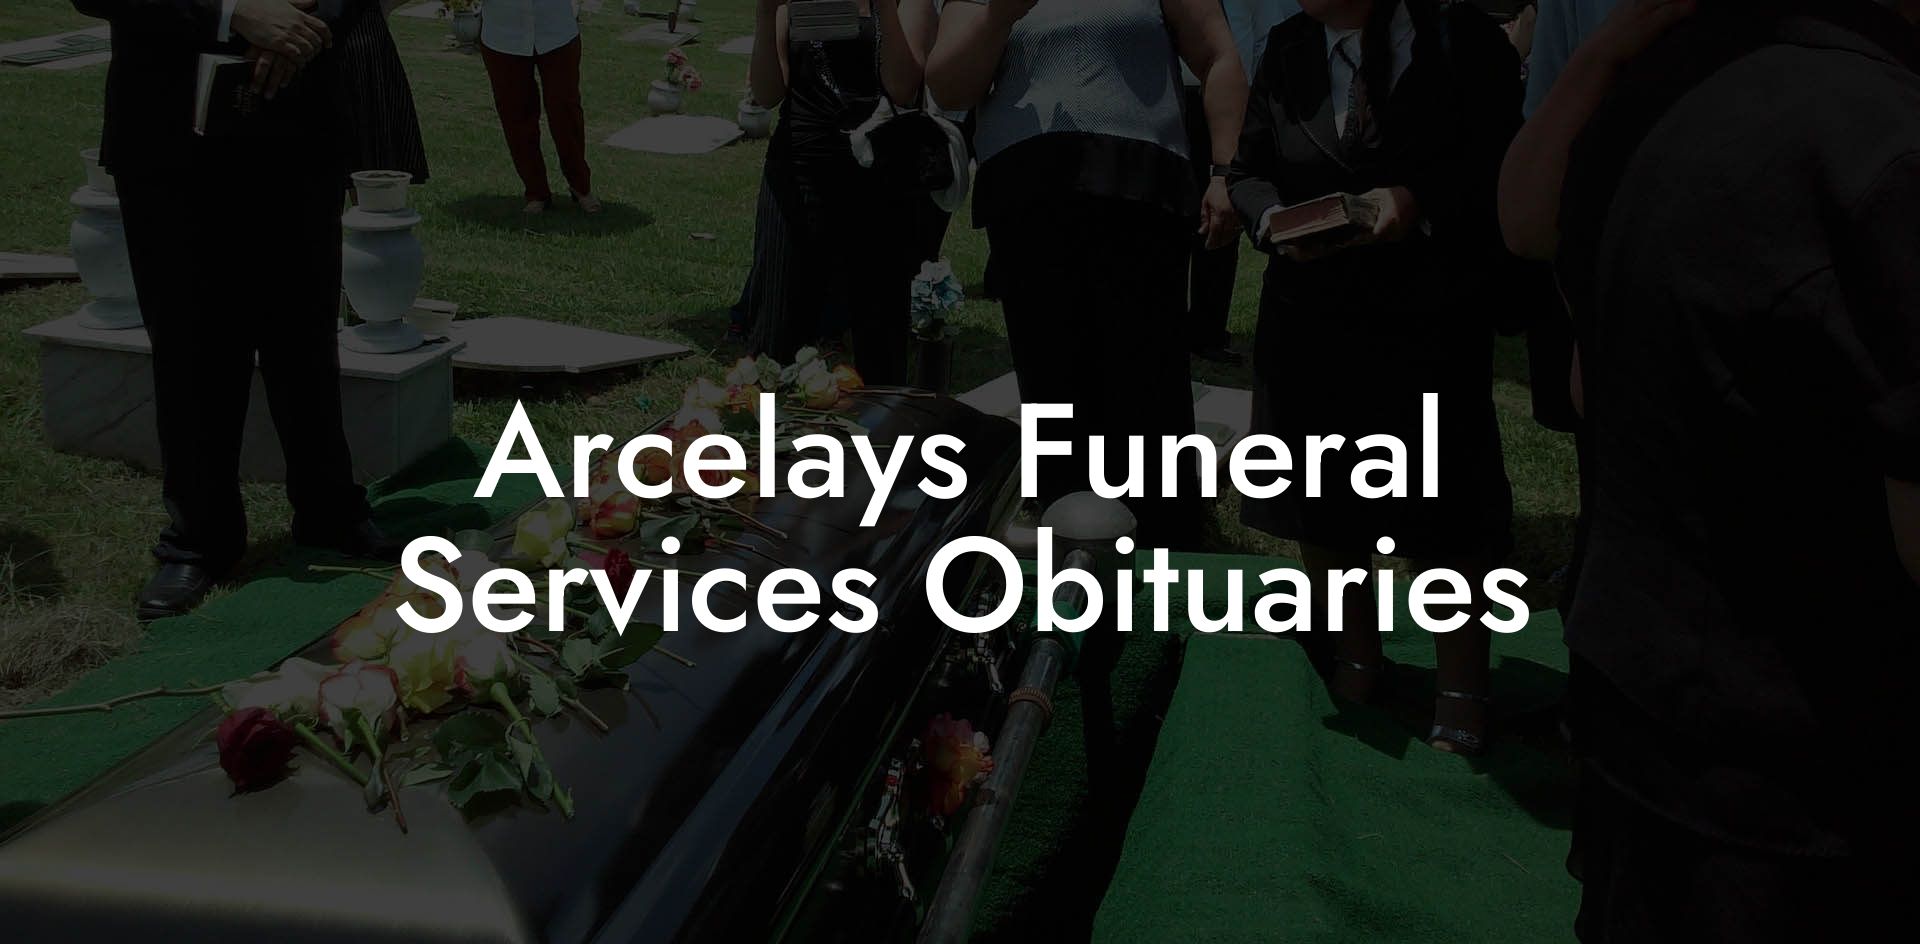 Arcelays Funeral Services Obituaries